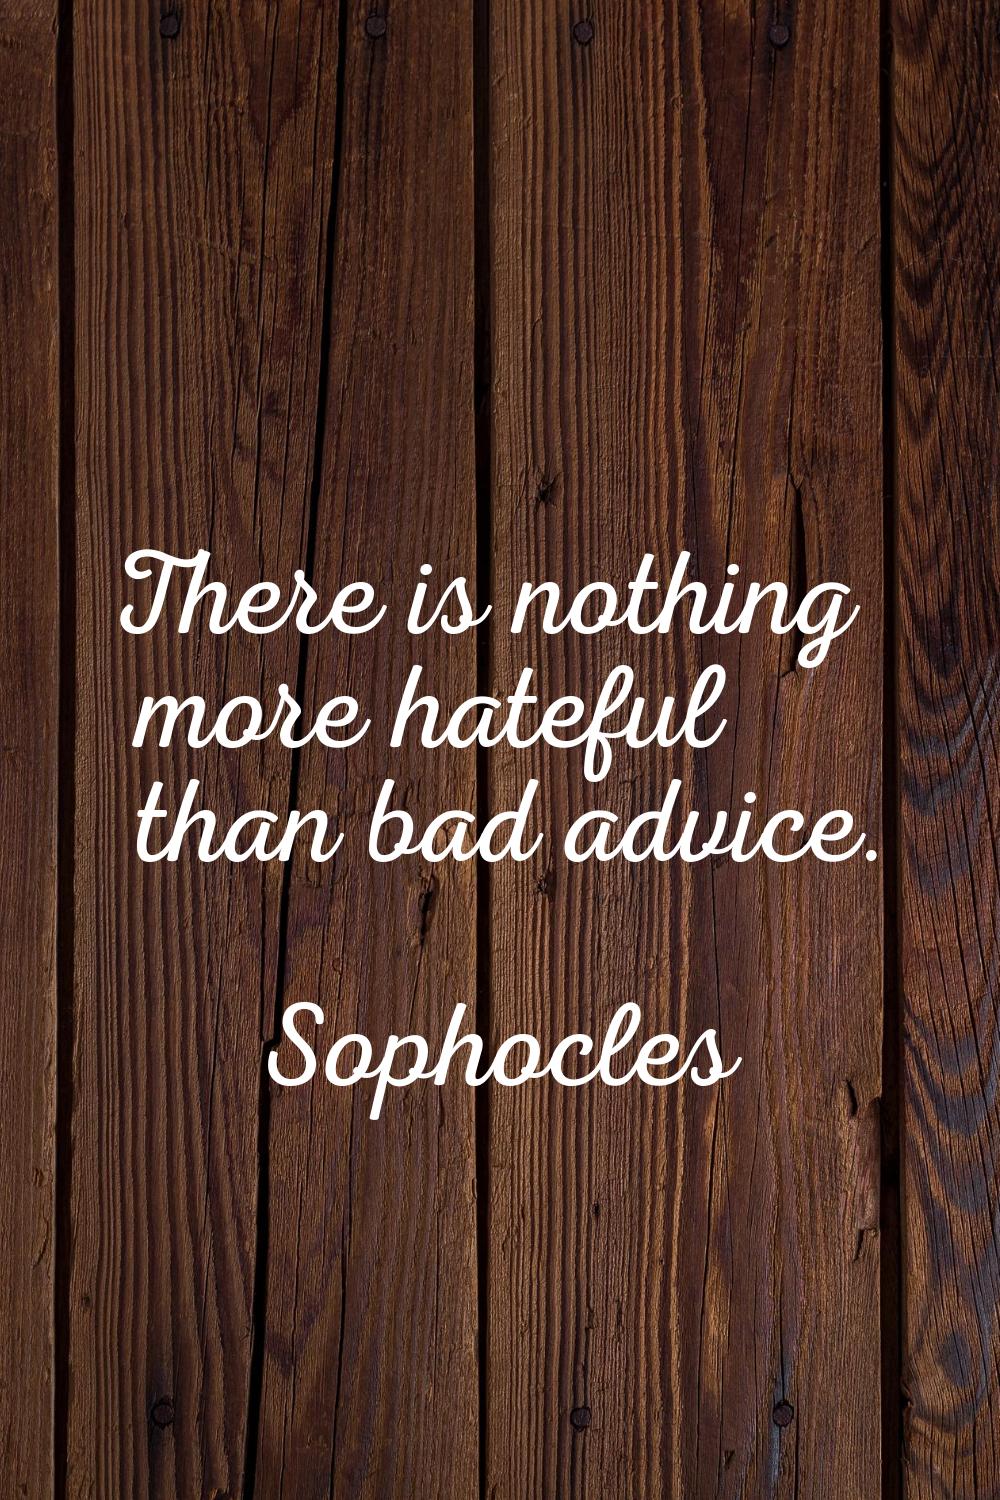 There is nothing more hateful than bad advice.